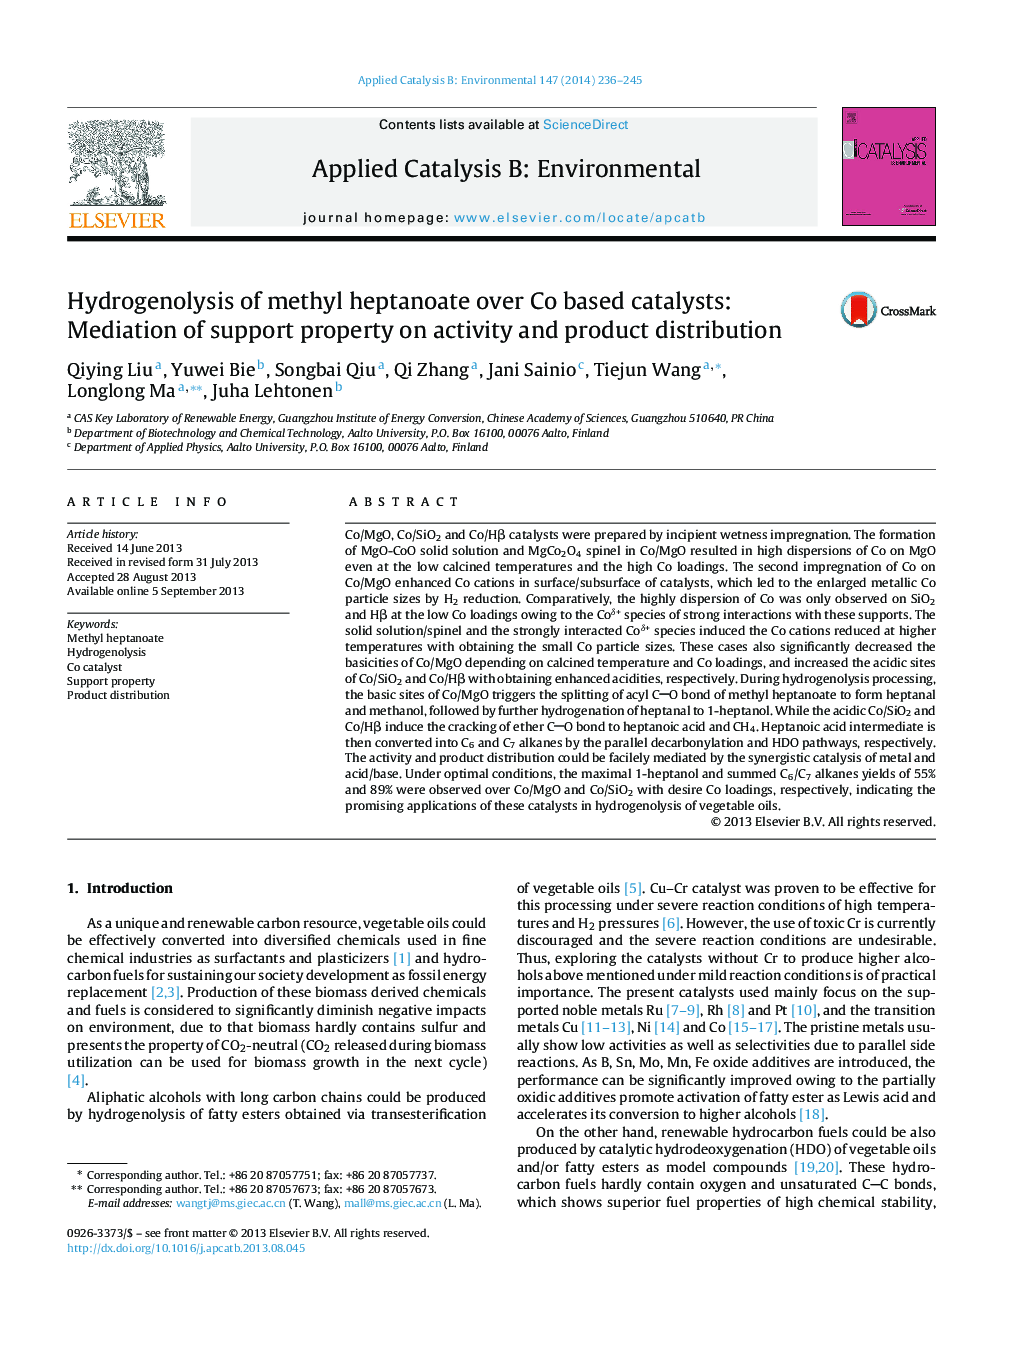 Hydrogenolysis of methyl heptanoate over Co based catalysts: Mediation of support property on activity and product distribution